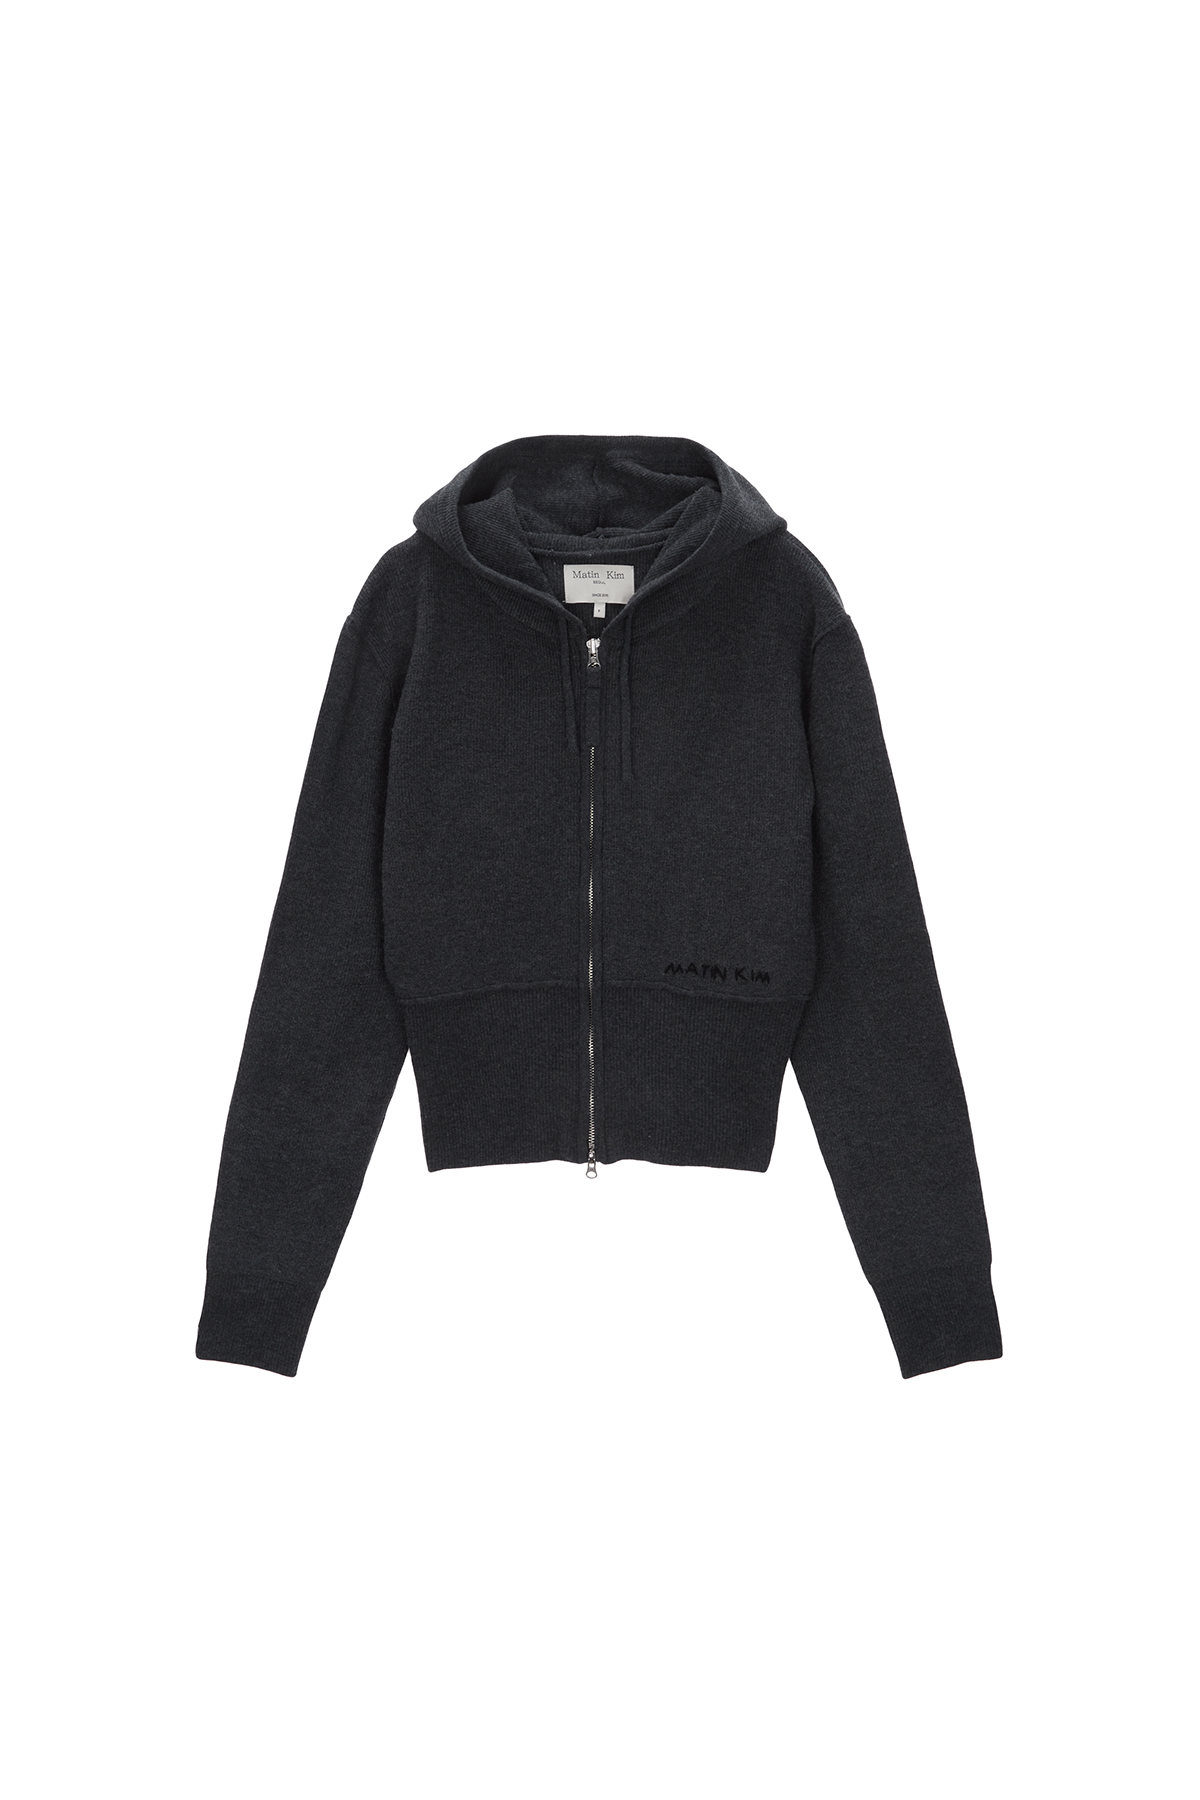 RIBBED KNIT HOODY ZIP UP FOR WOMEN IN CHARCOAL